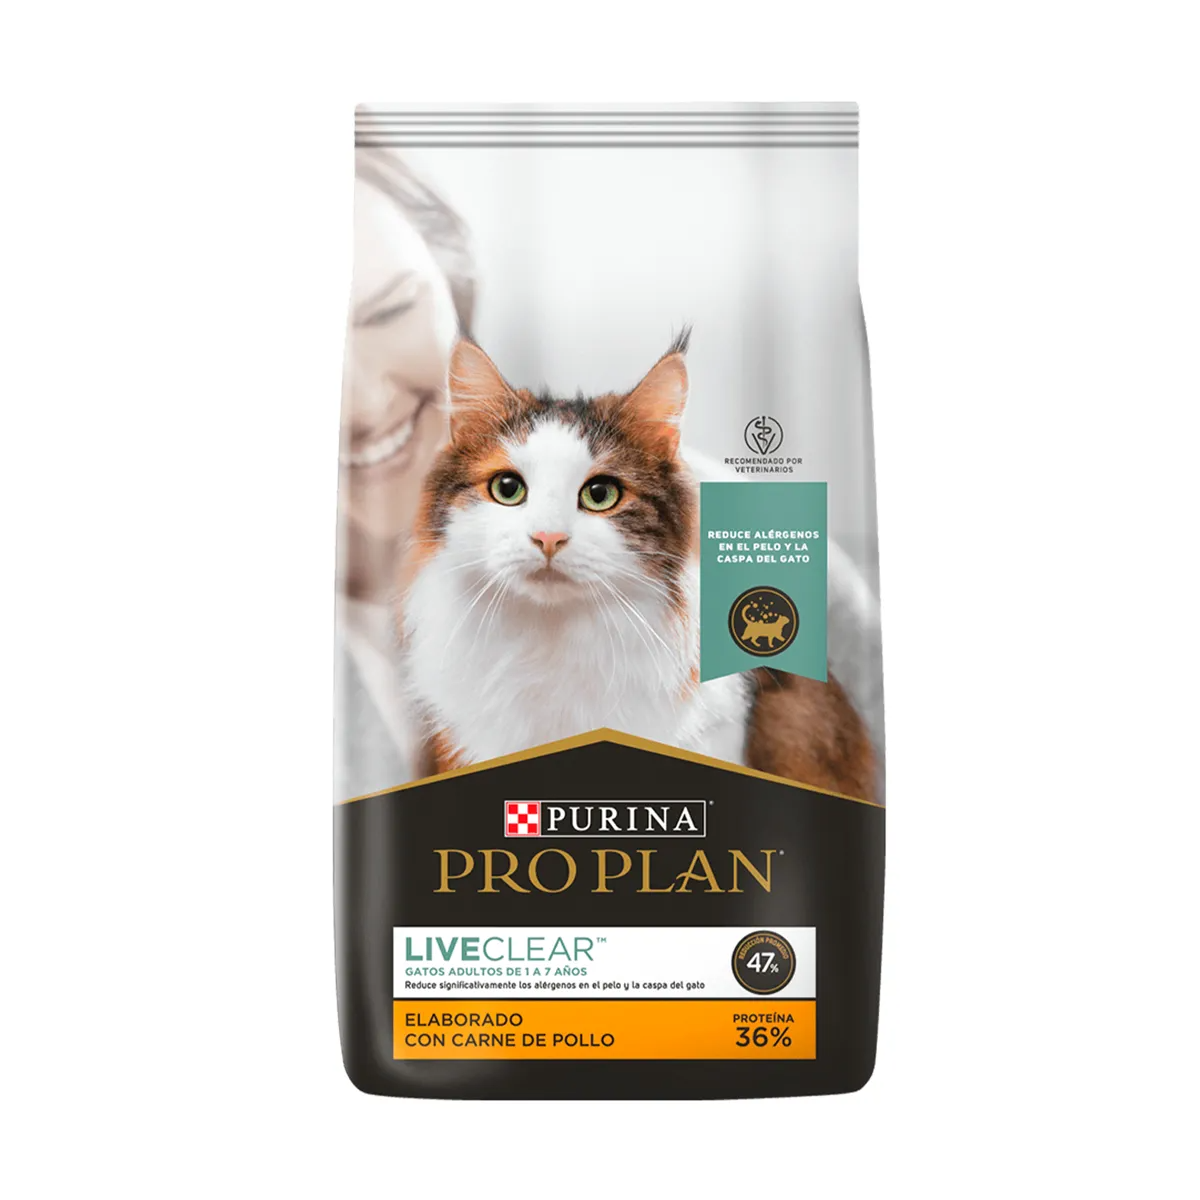 ProPlan-Liveclear-01.png_0.png